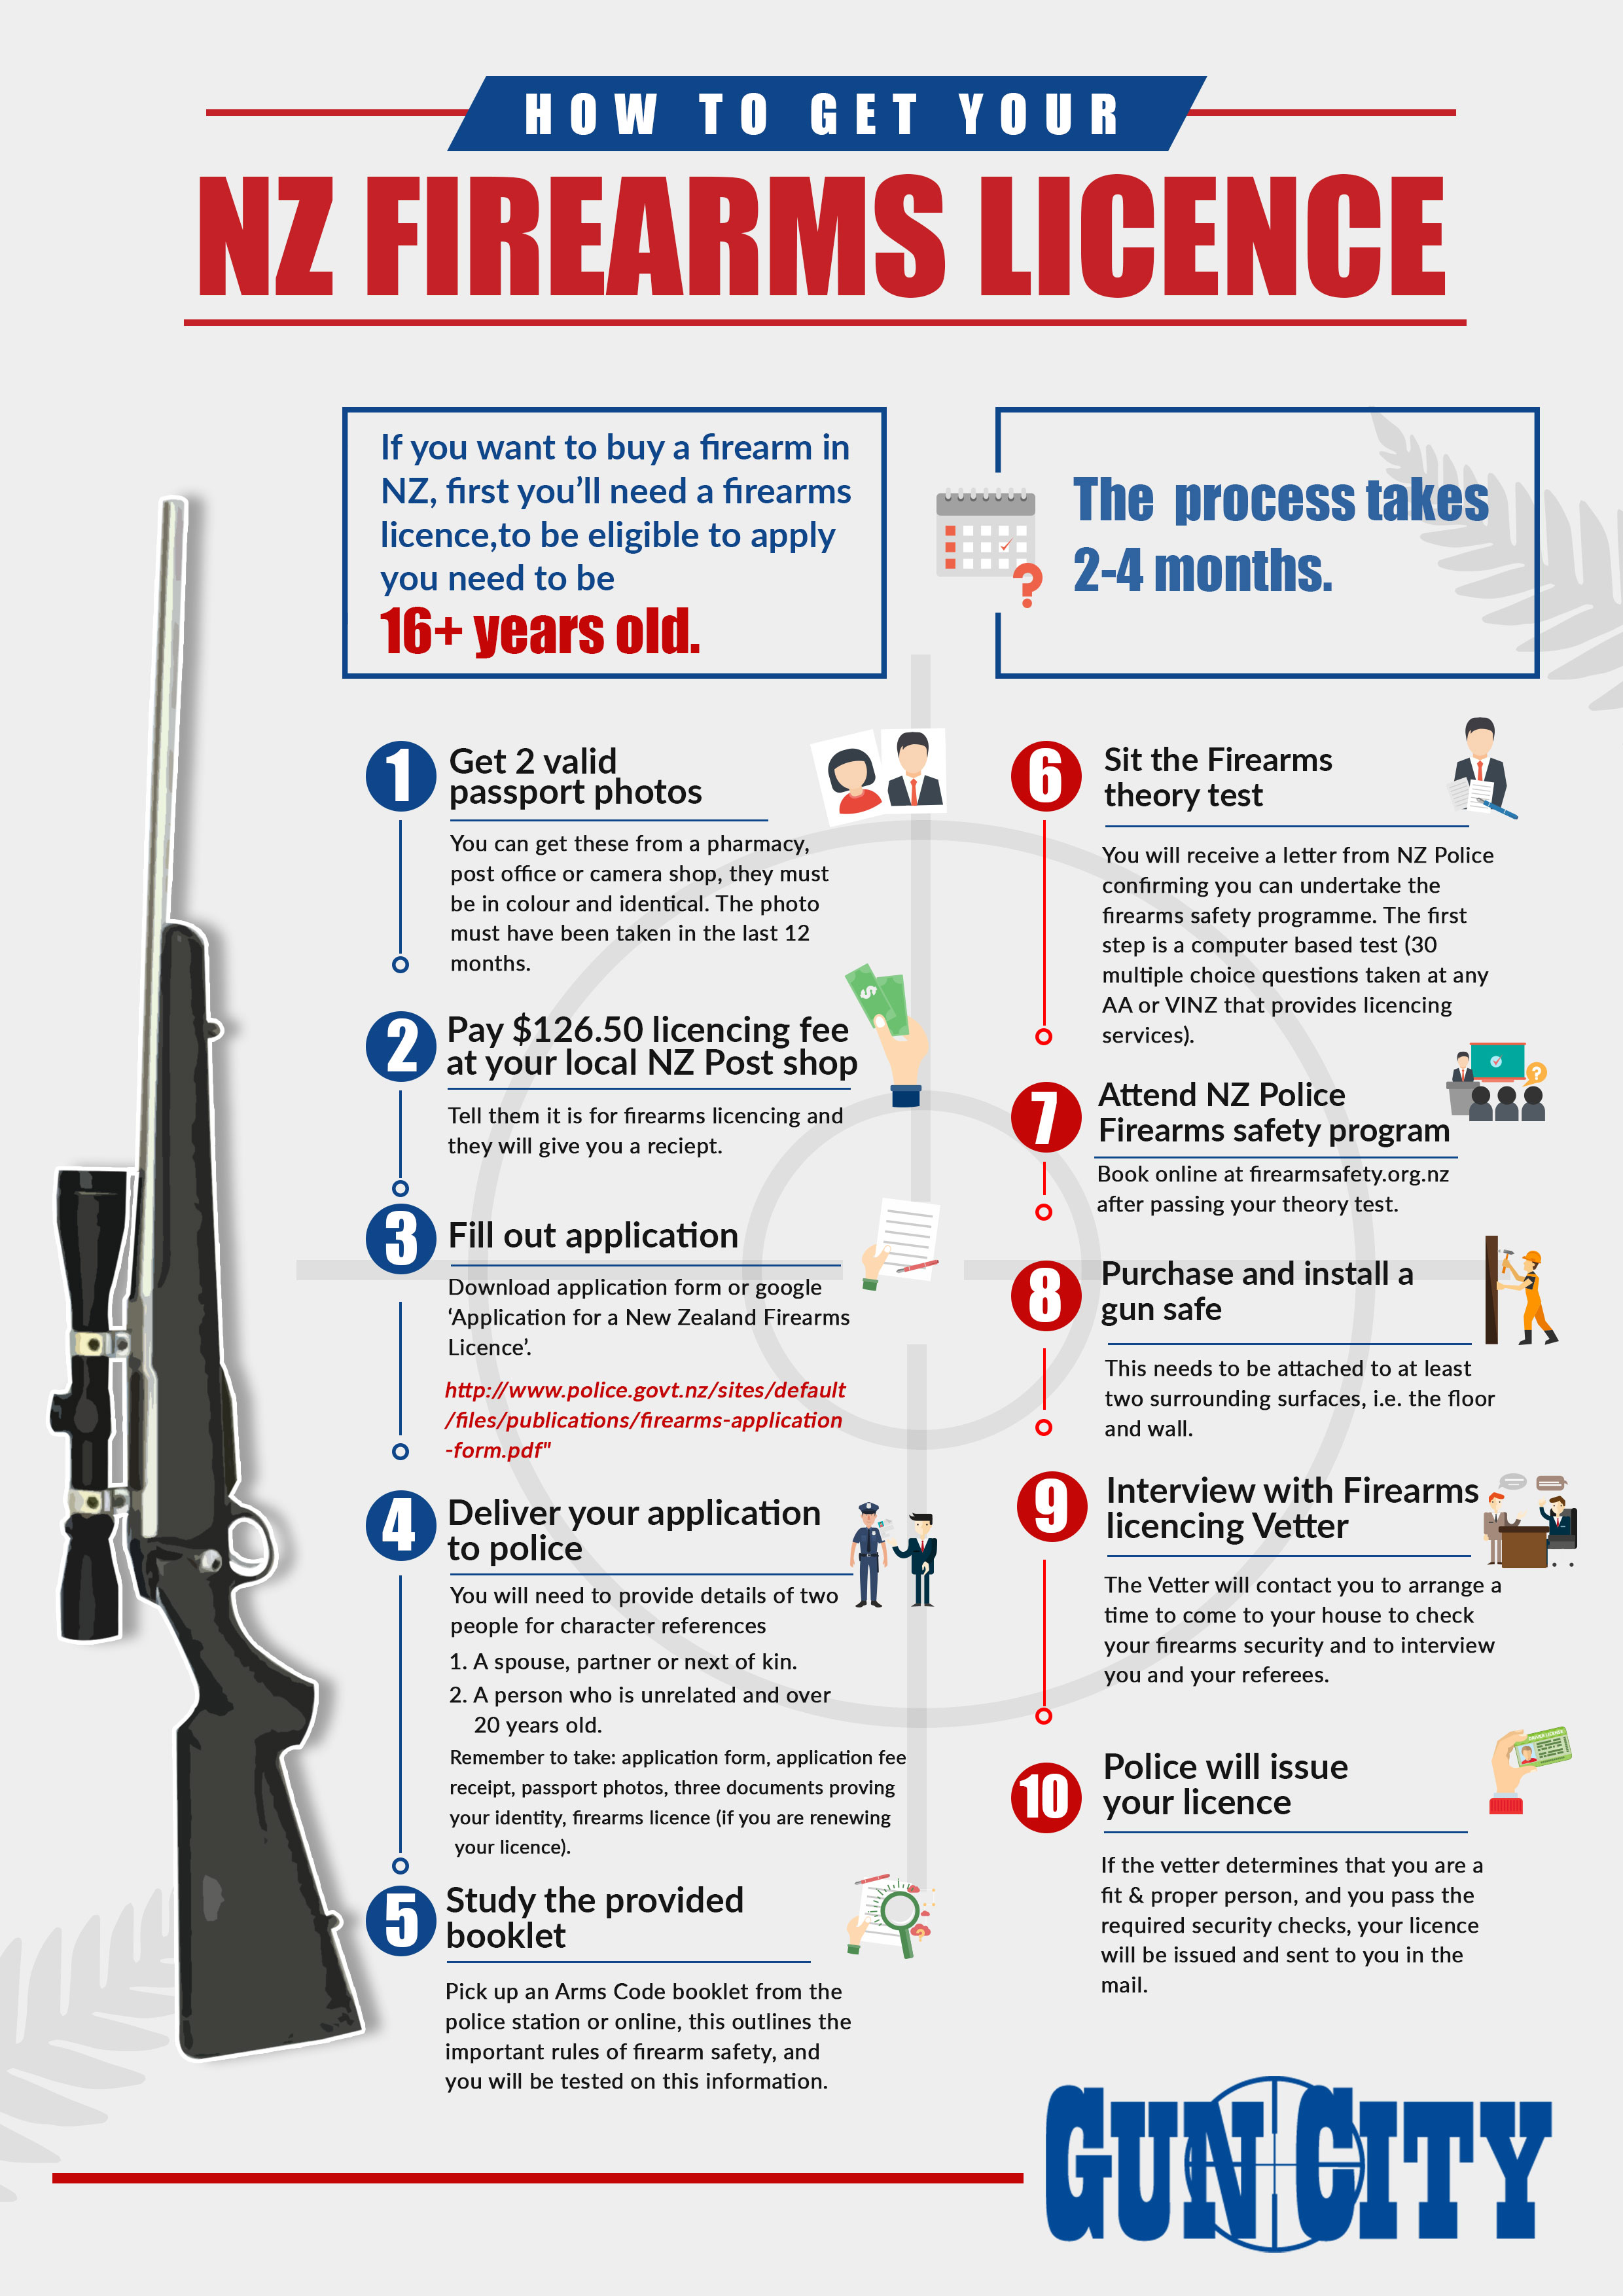 How To Get Your NZ Firearms Licence